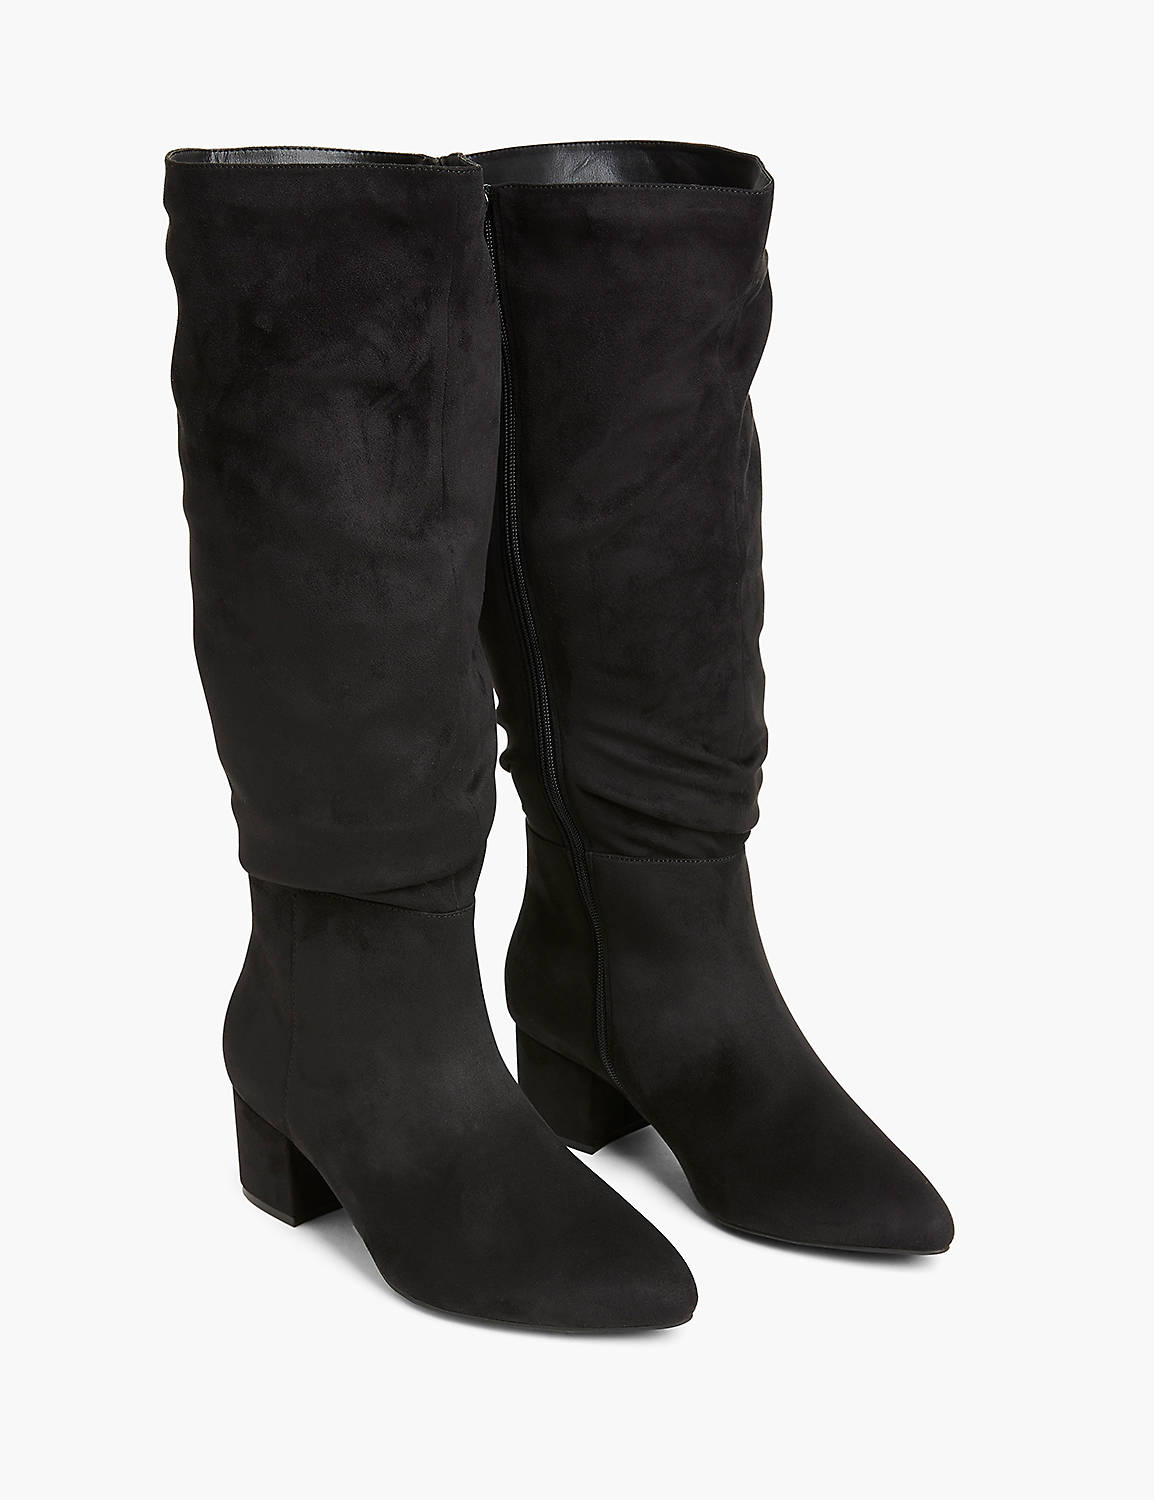 SLOUCHY TALL BOOT Product Image 1